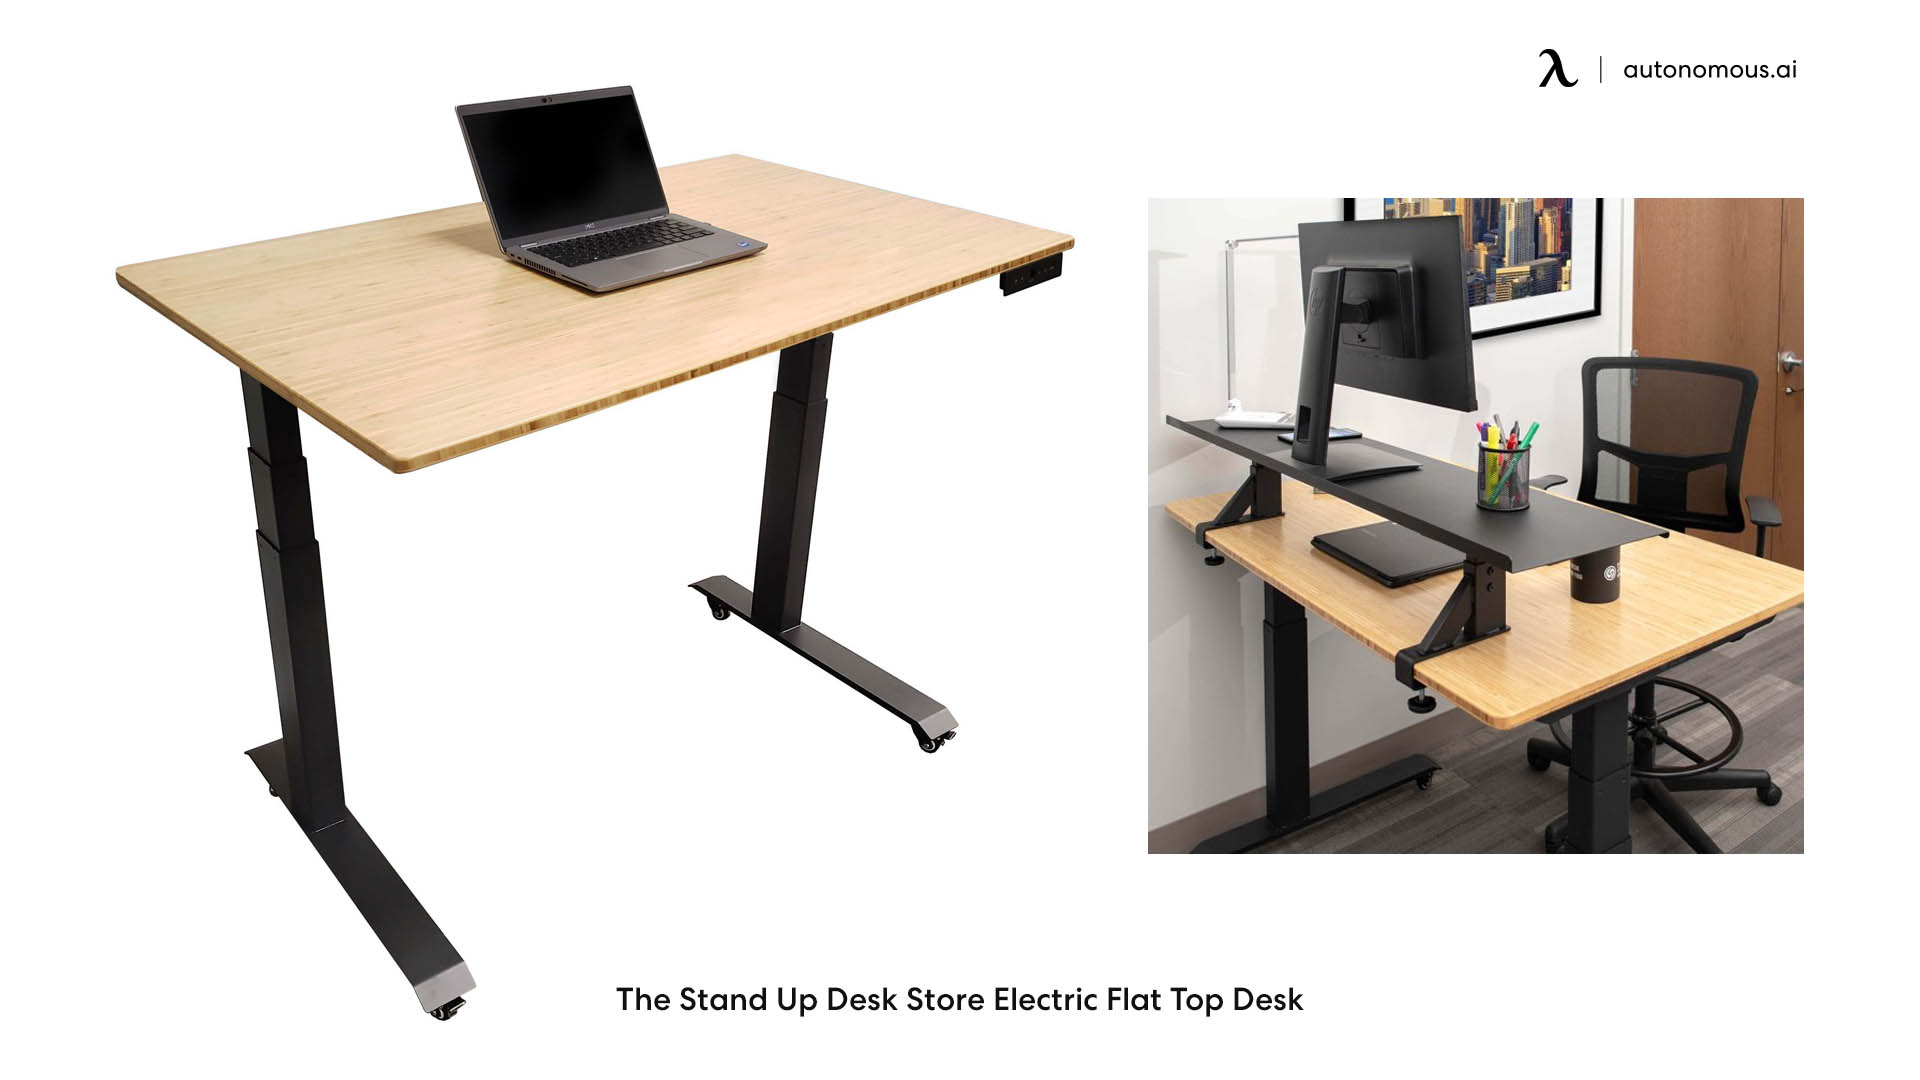 The Stand Up Desk Store Electric Flat Top Desk